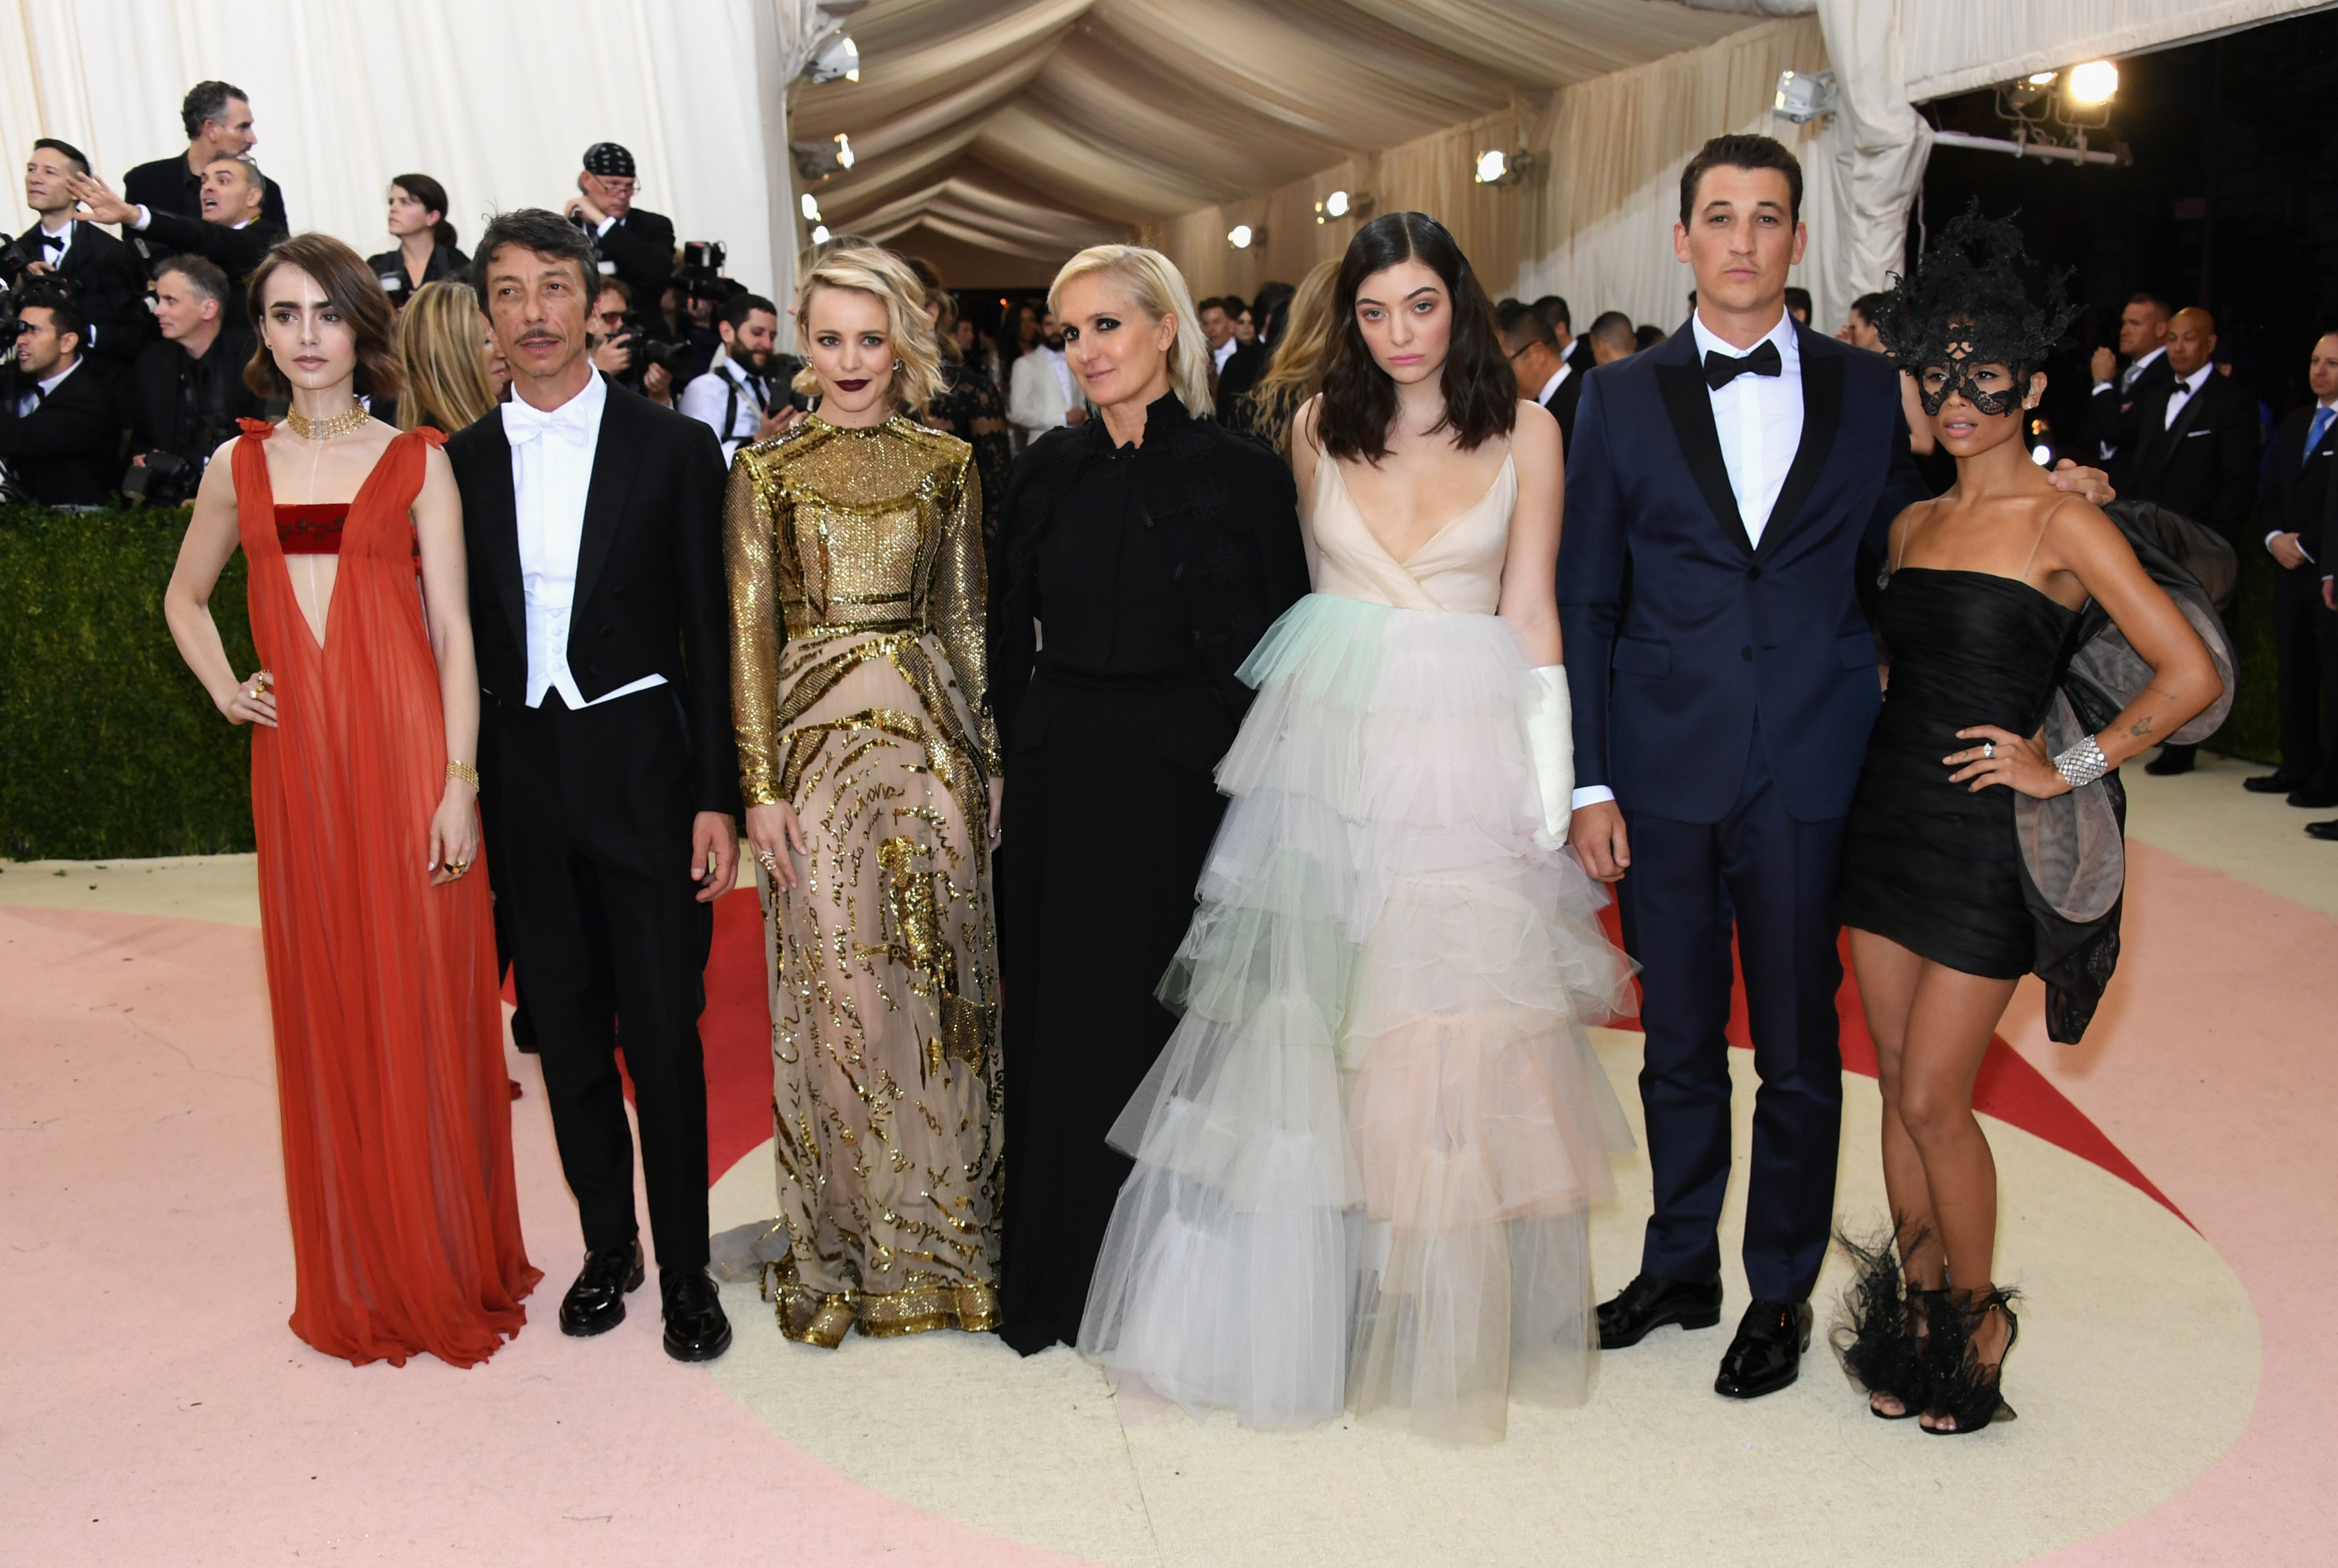 Photos: Stars pay homage to 2016 Met Gala’s tech-centered theme